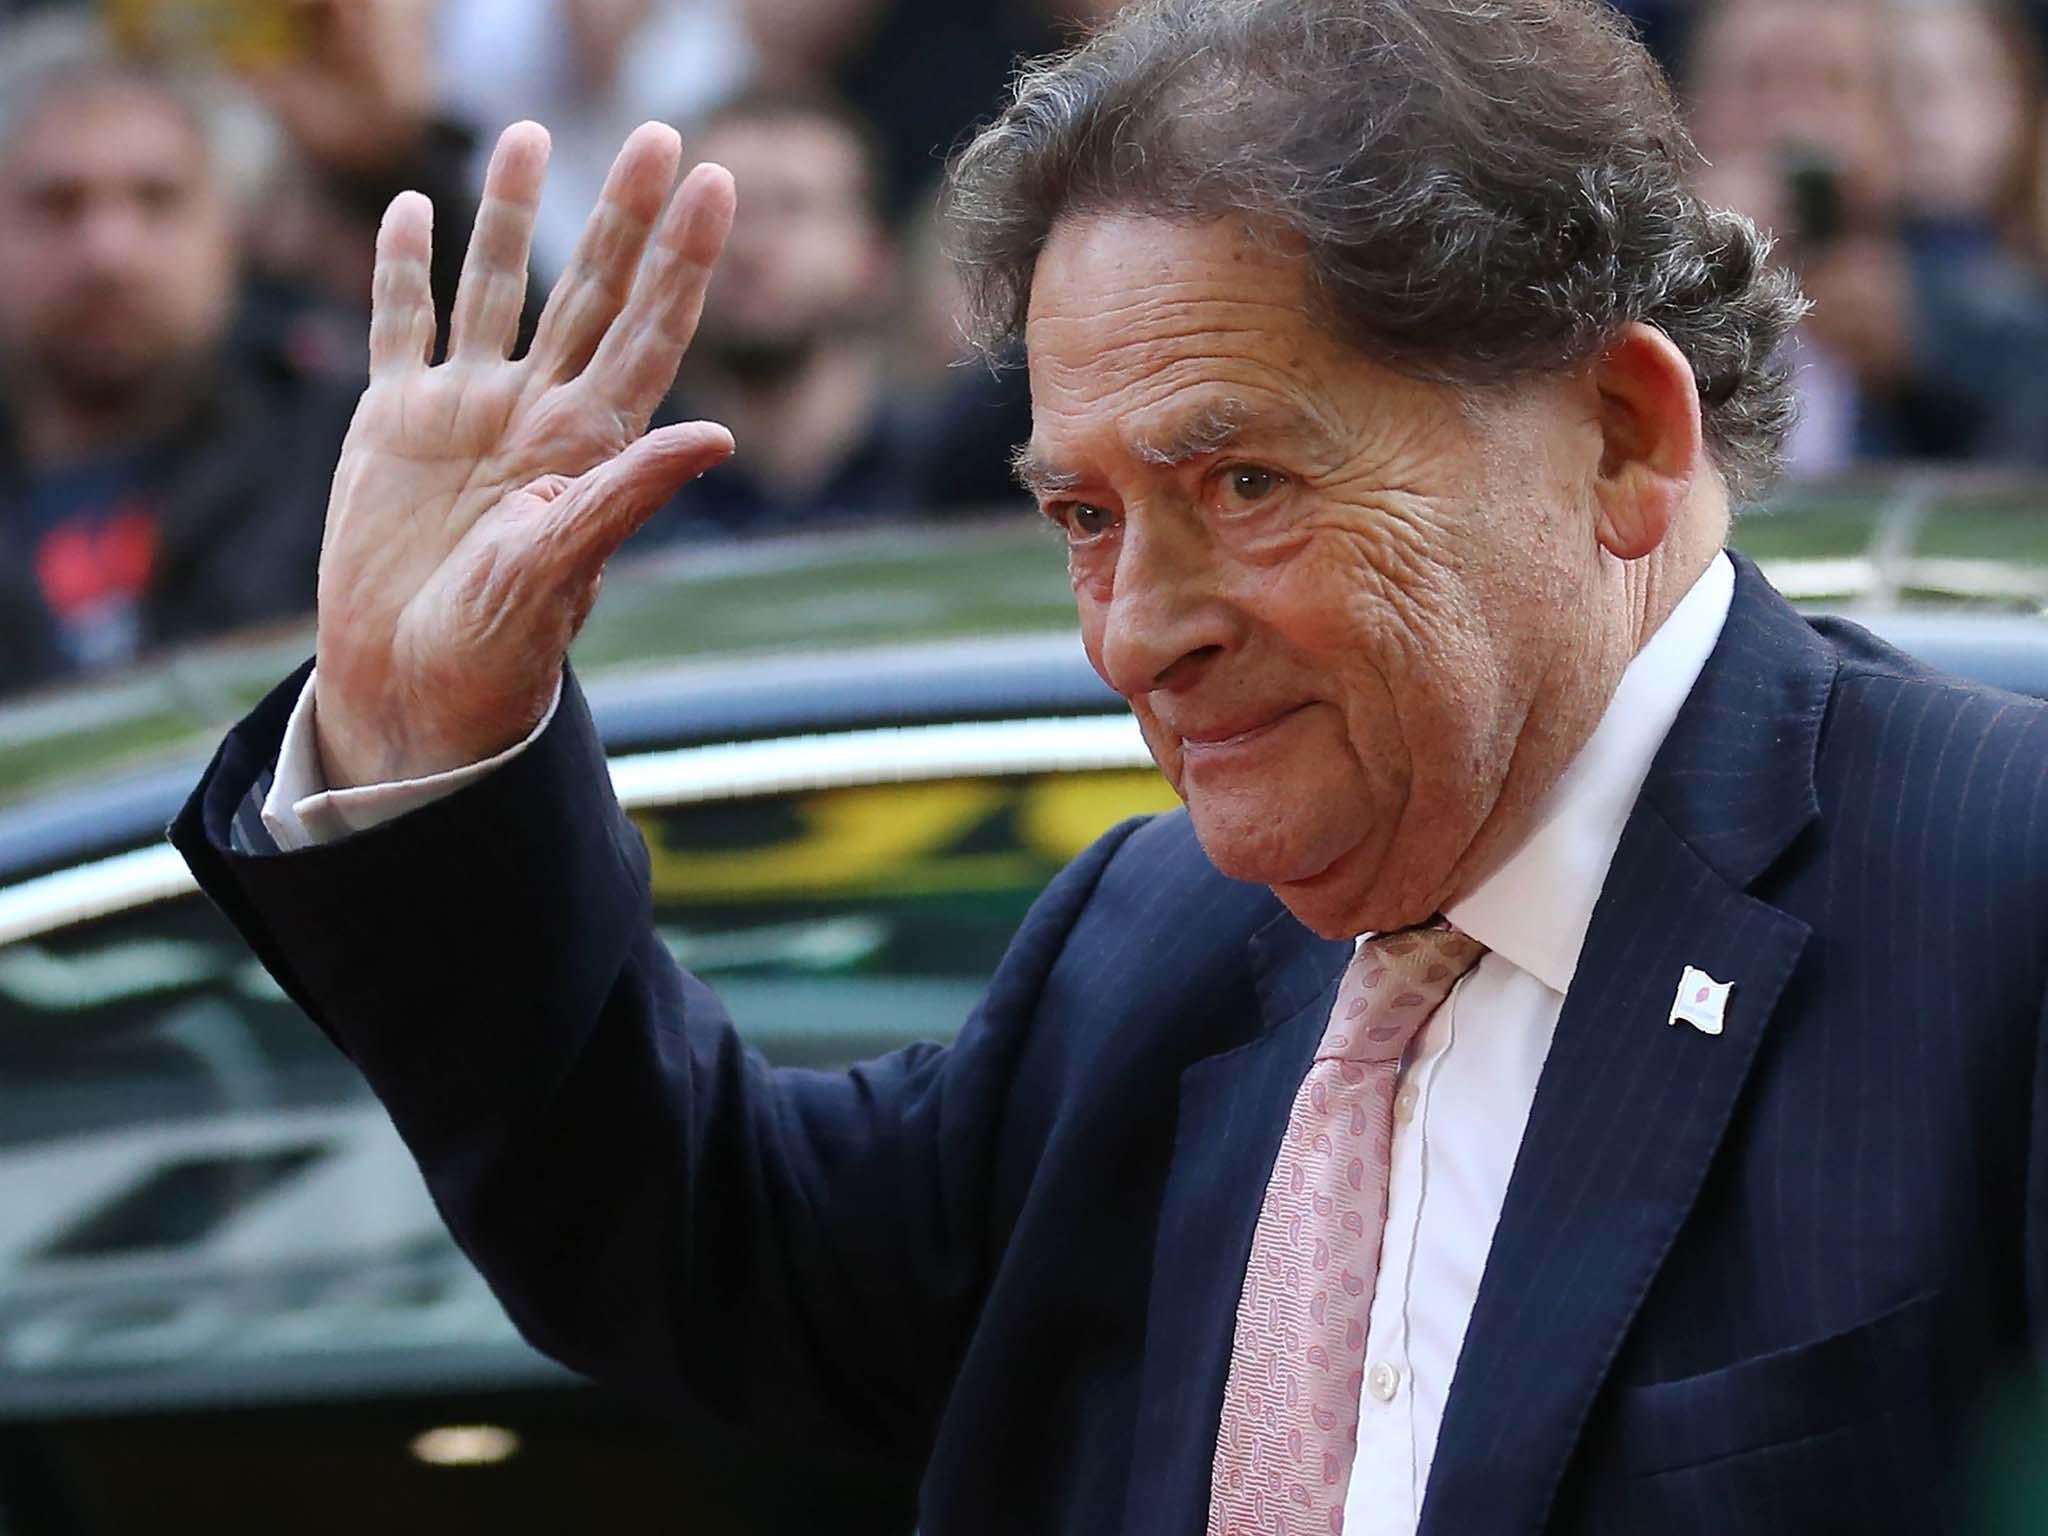 The Global Warming Policy Foundation (GWPF) – set up by former Conservative Chancellor Nigel Lawson – has persistently disputed scientific research into climate change